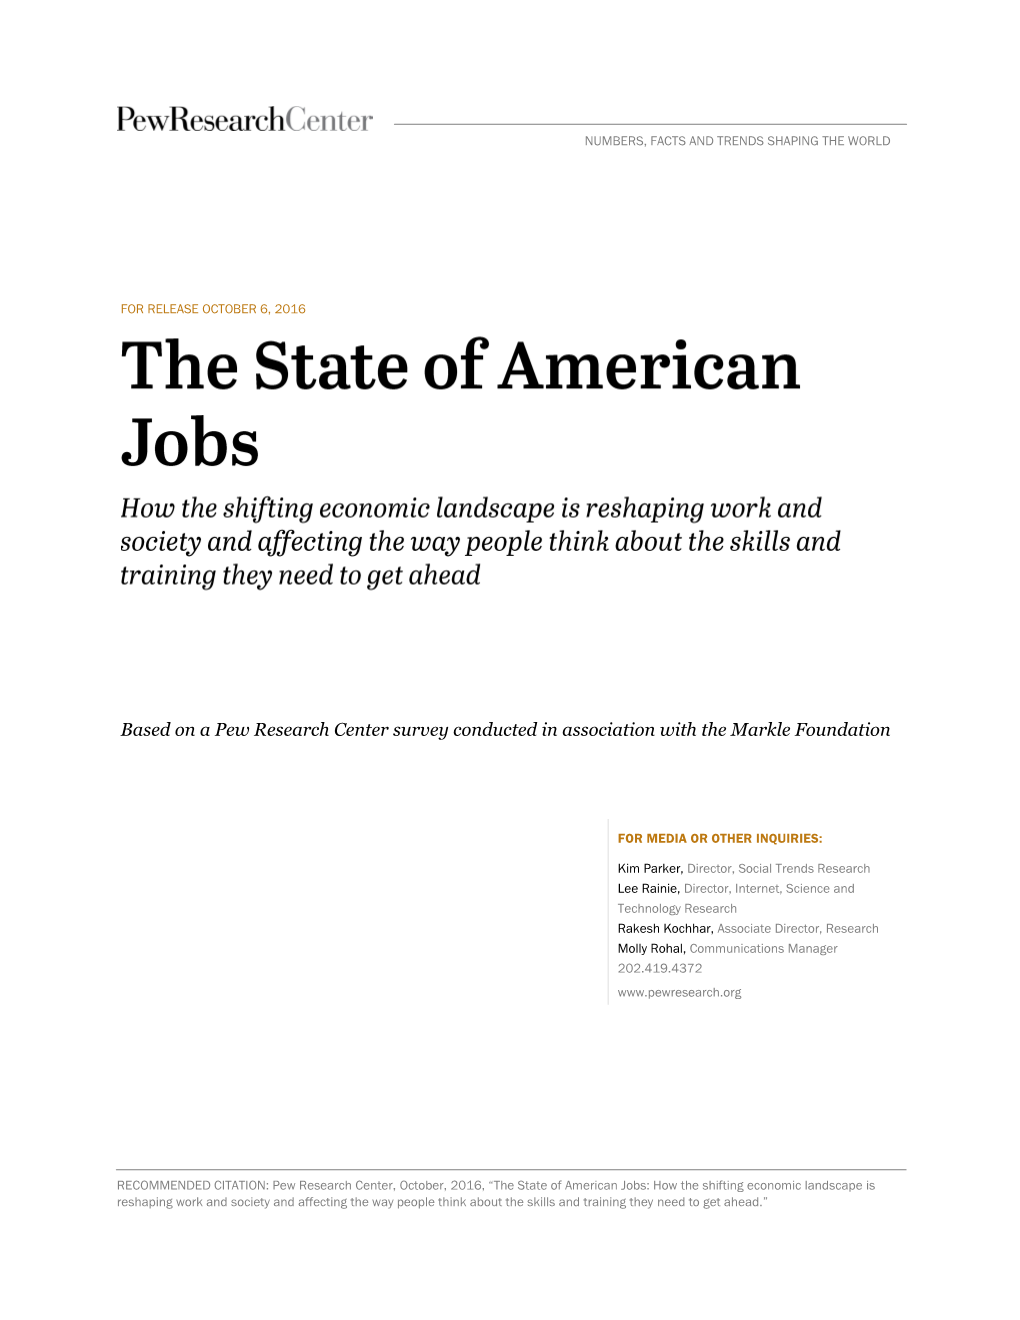 The State of American Jobs